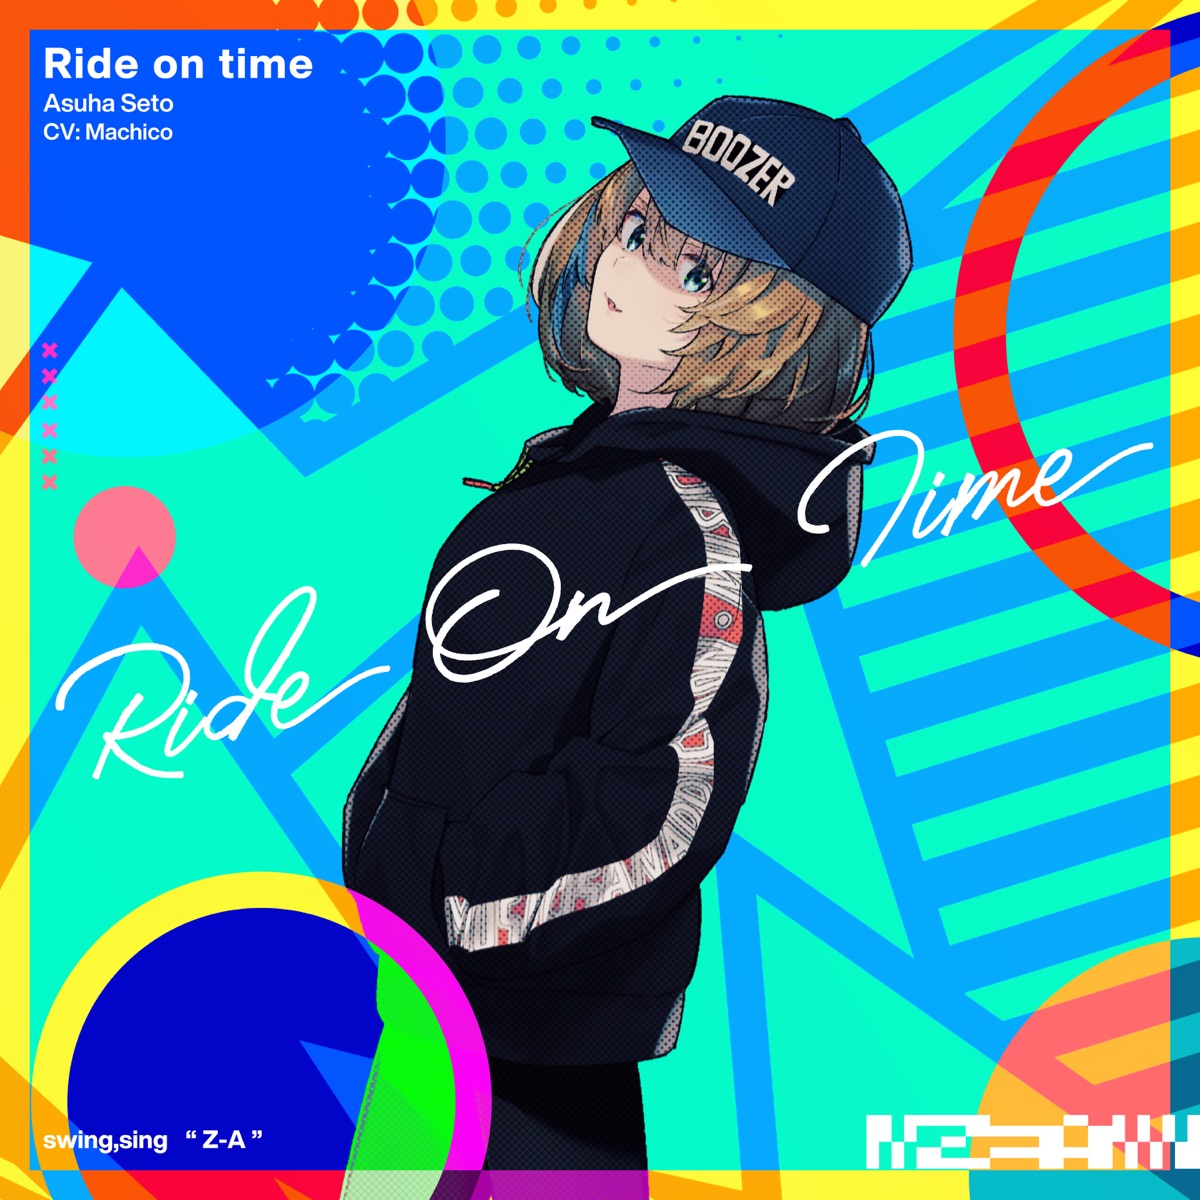 Cover art for『Asuha Seto (Machico) - Ride on time』from the release『Ride on time』